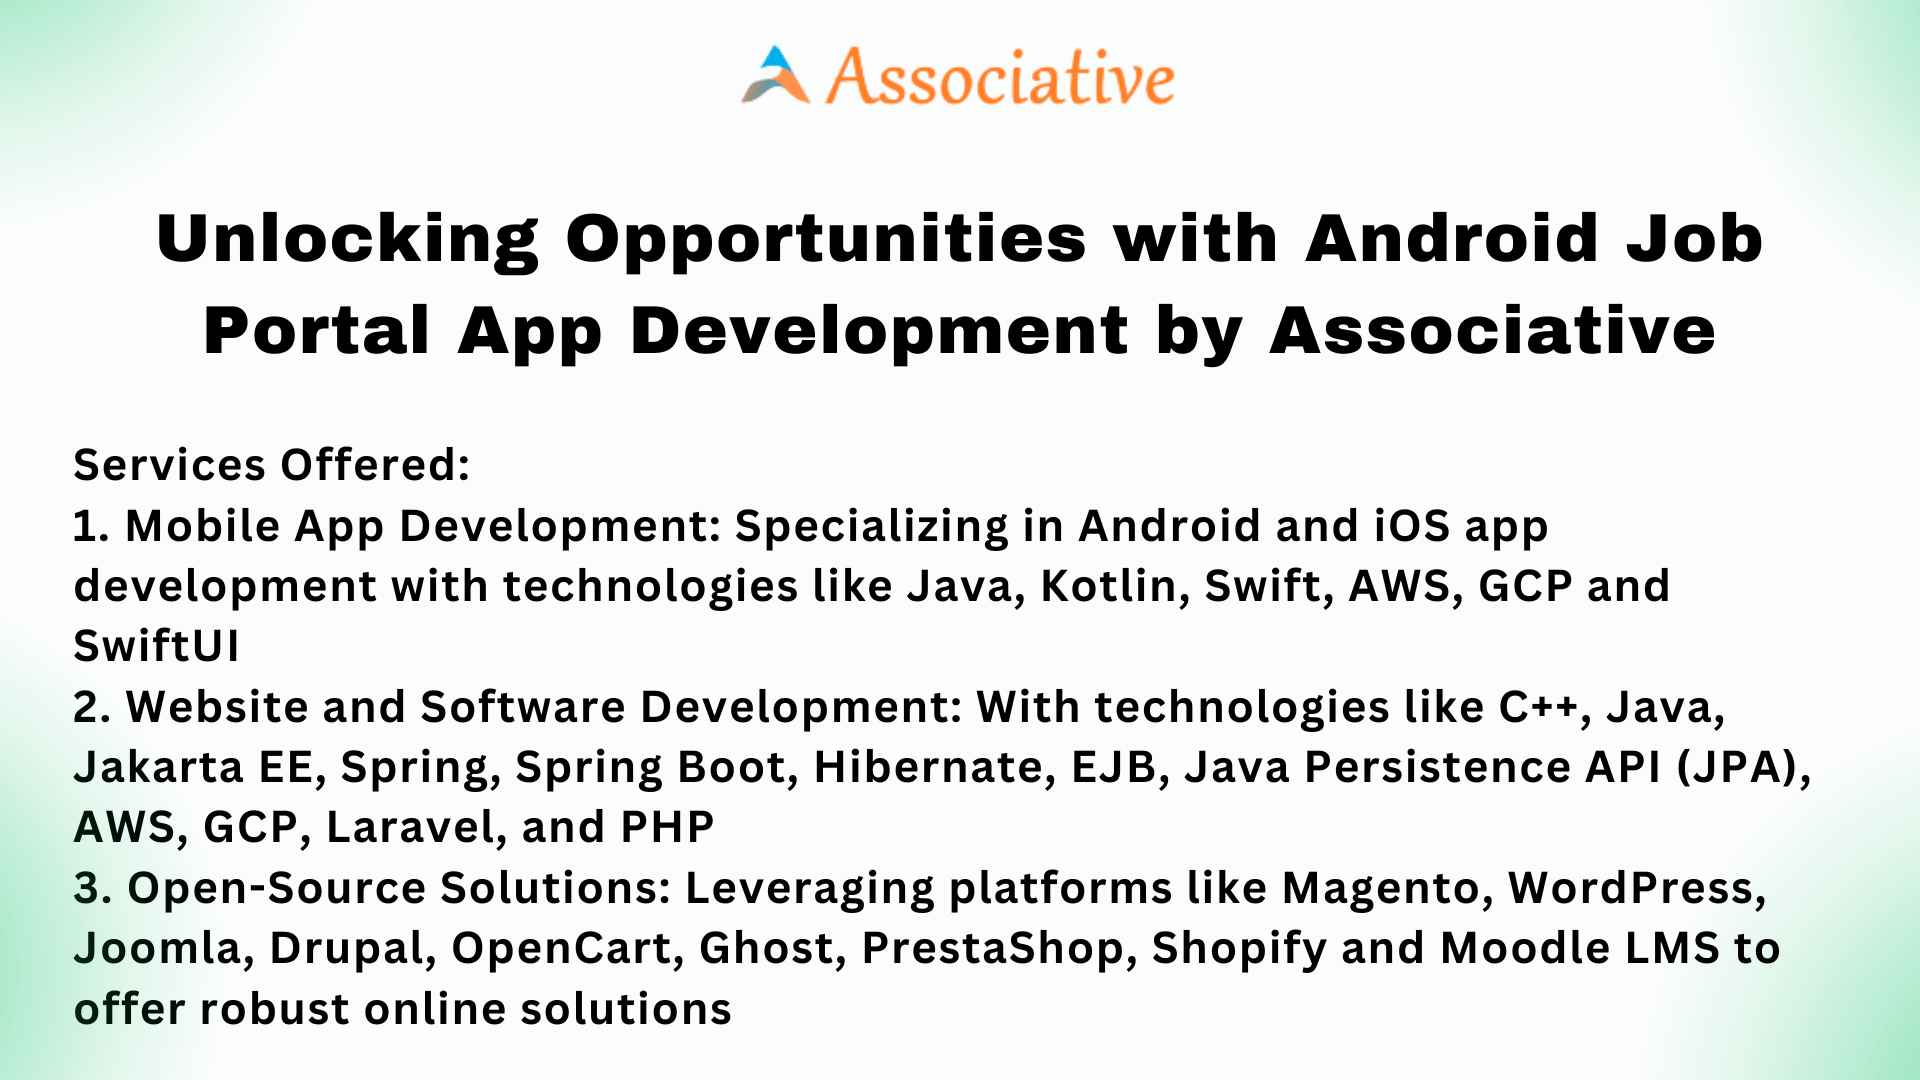 Unlocking Opportunities with Android Job Portal App Development by Associative